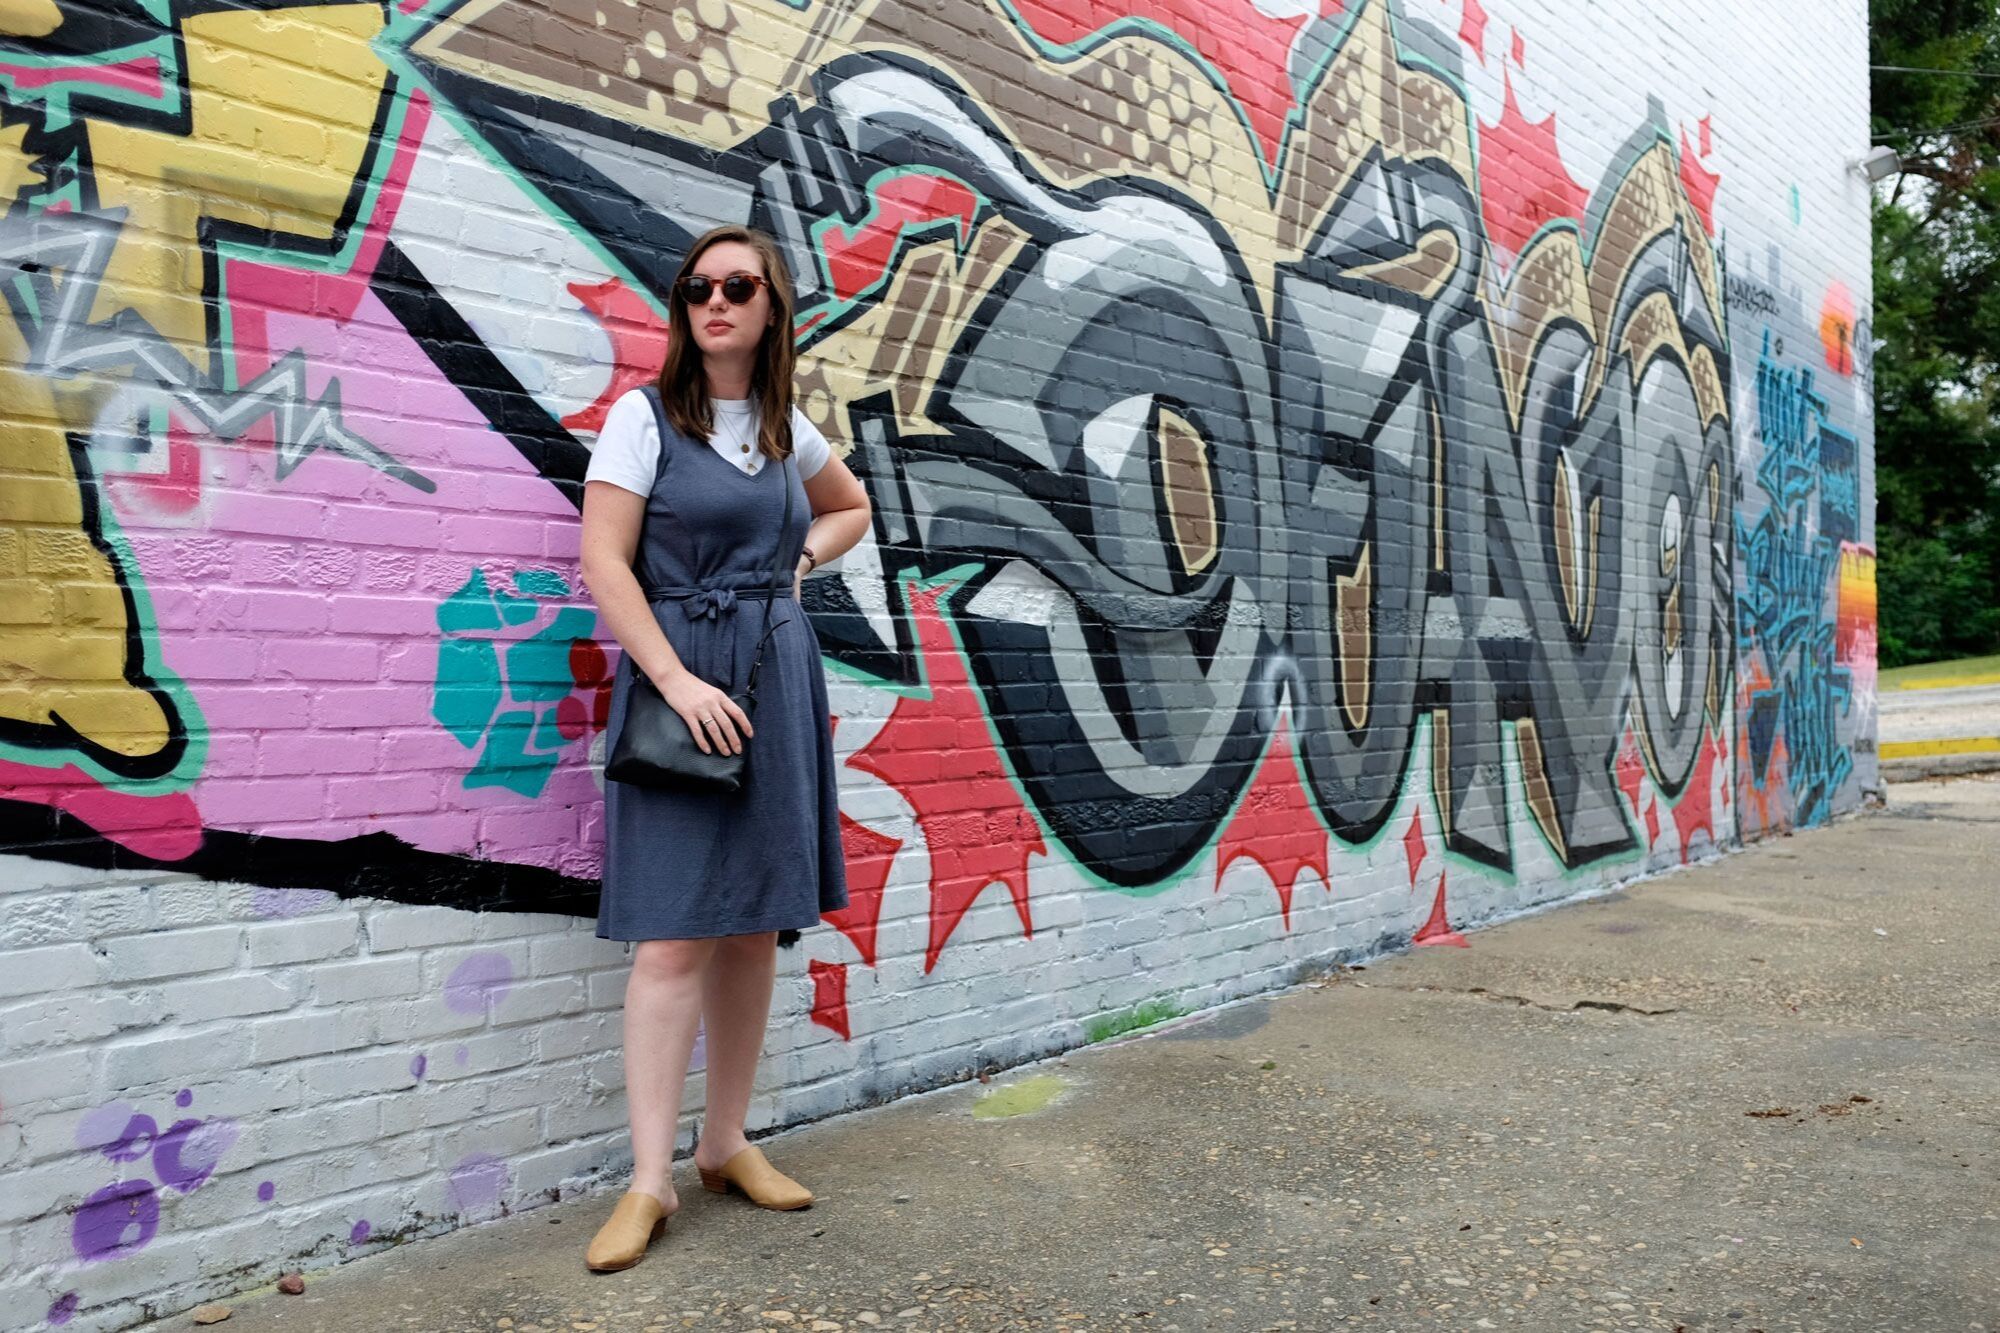 Alyssa standing in front of a graffiti wall in a blue dress with a white tee underneath